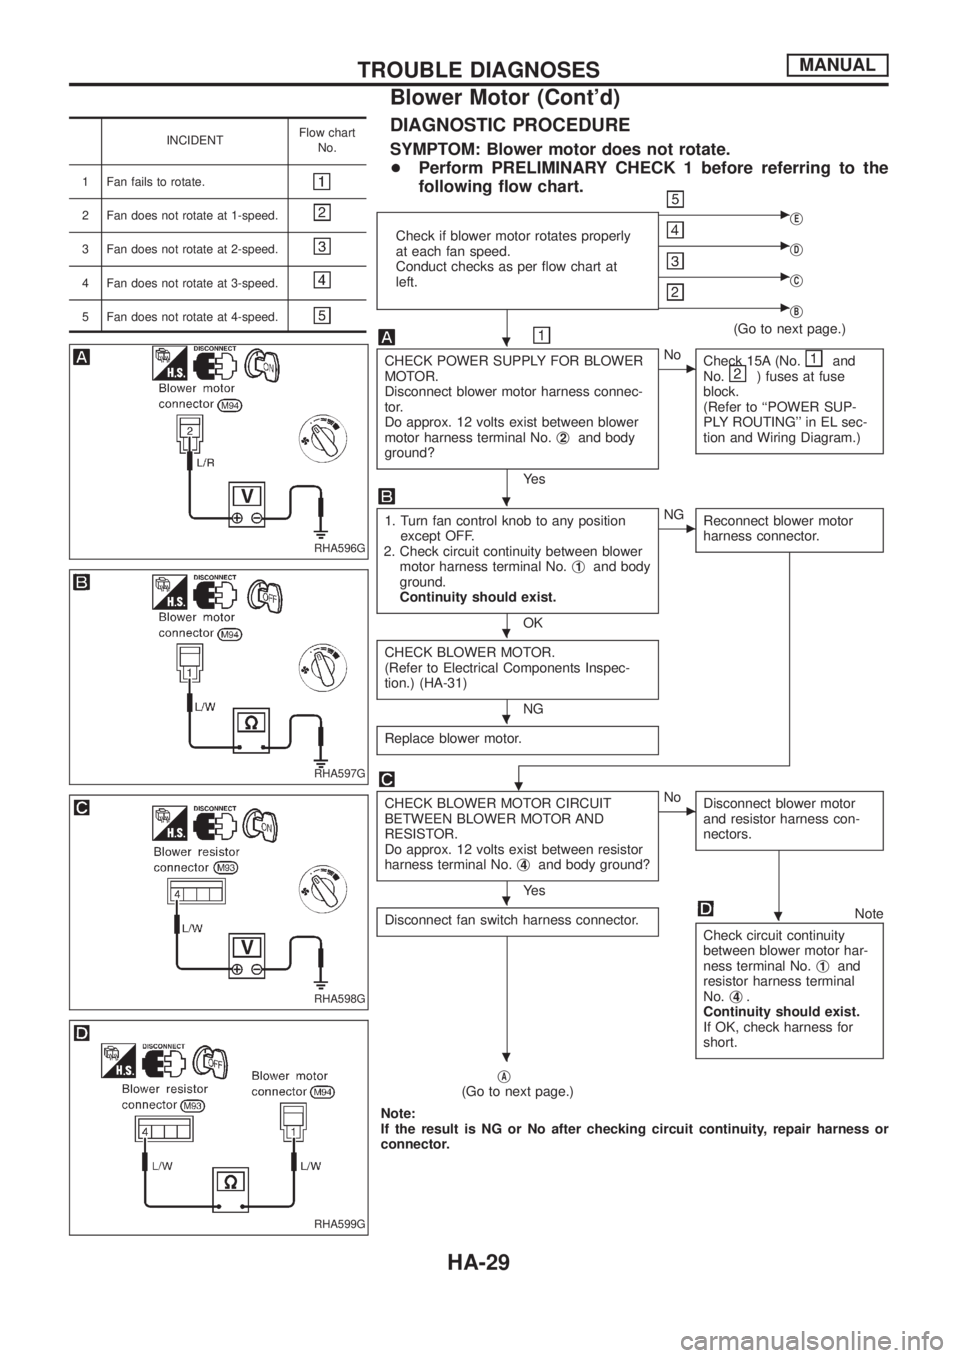 NISSAN PATROL 2006  Service Manual INCIDENTFlow chart
No.
1 Fan fails to rotate.
2 Fan does not rotate at 1-speed.
3 Fan does not rotate at 2-speed.
4 Fan does not rotate at 3-speed.
5 Fan does not rotate at 4-speed.
DIAGNOSTIC PROCEDU